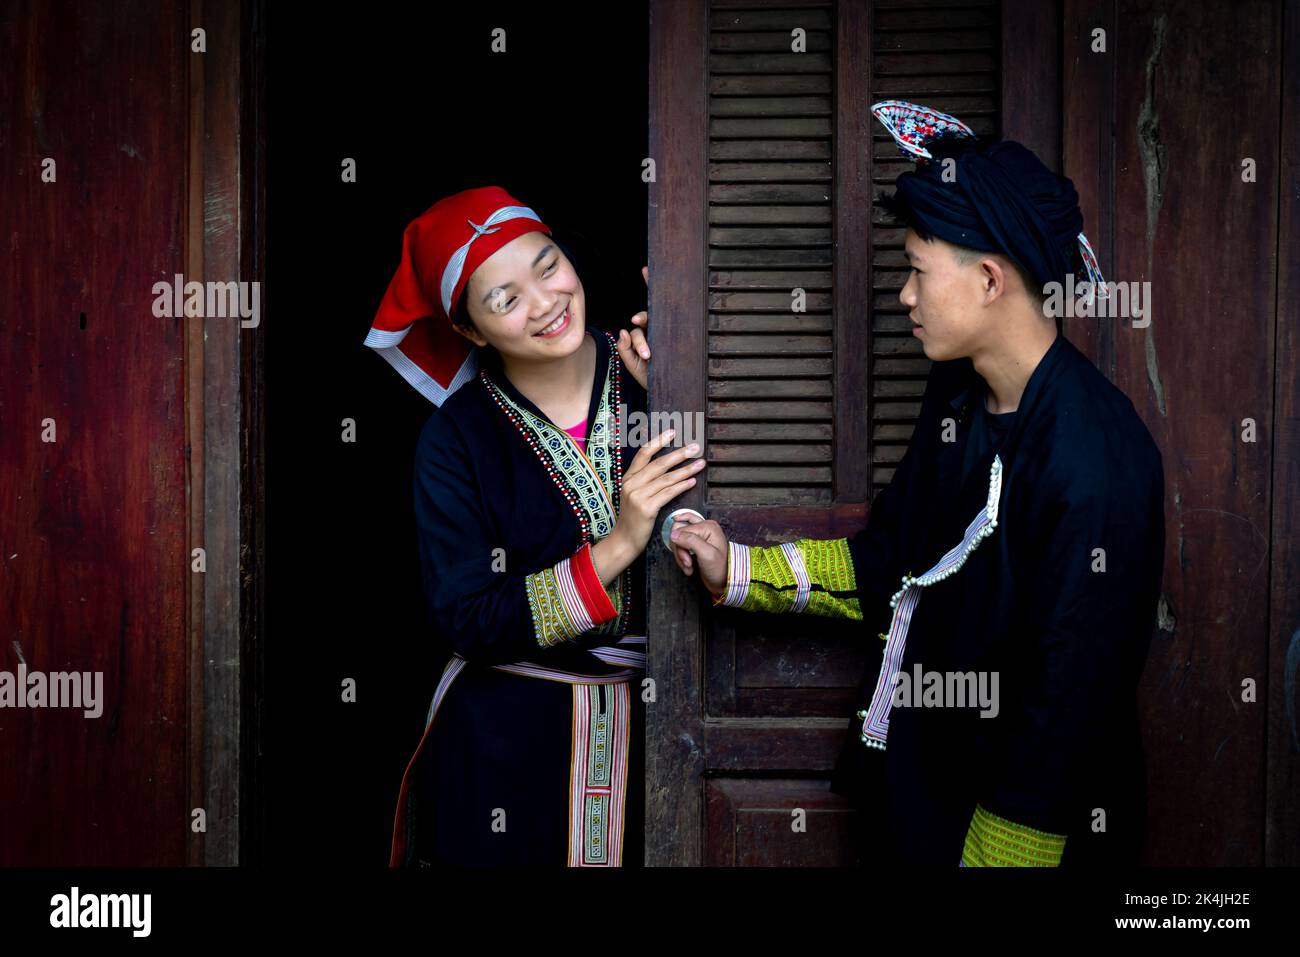 Sa Pa Town, Lao Cai Province, Vietnam - September 2, 2022: Portrait of a young man and girl in traditional costumes of the Red Dao ethnic minority in Stock Photo